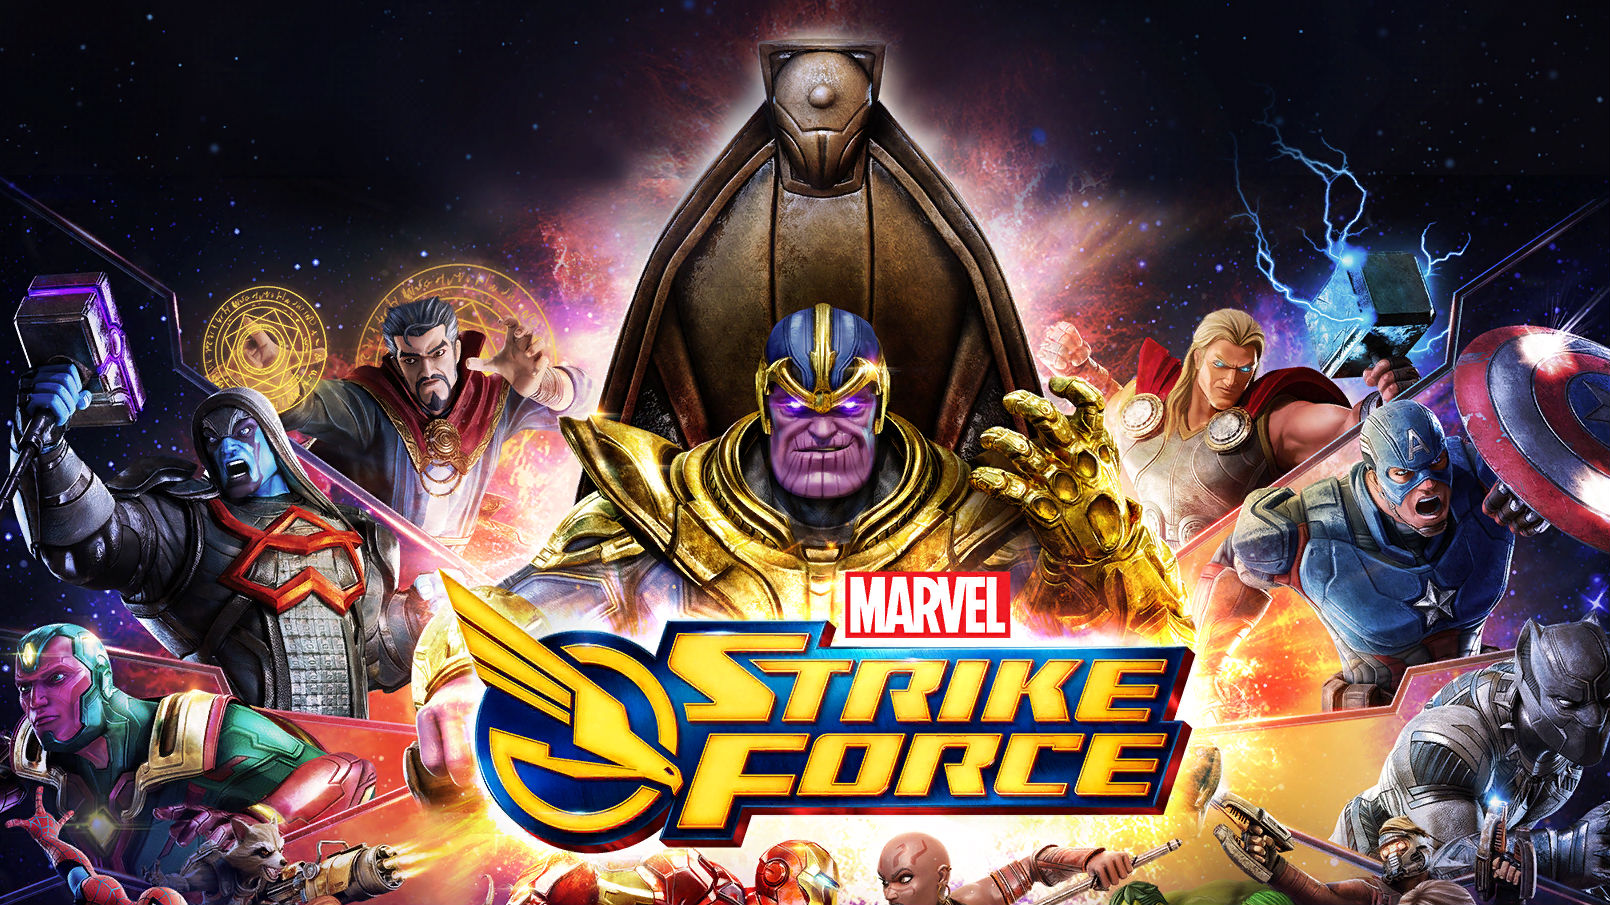 Infinity War is coming: Unlock Thanos now in Marvel Strike Force